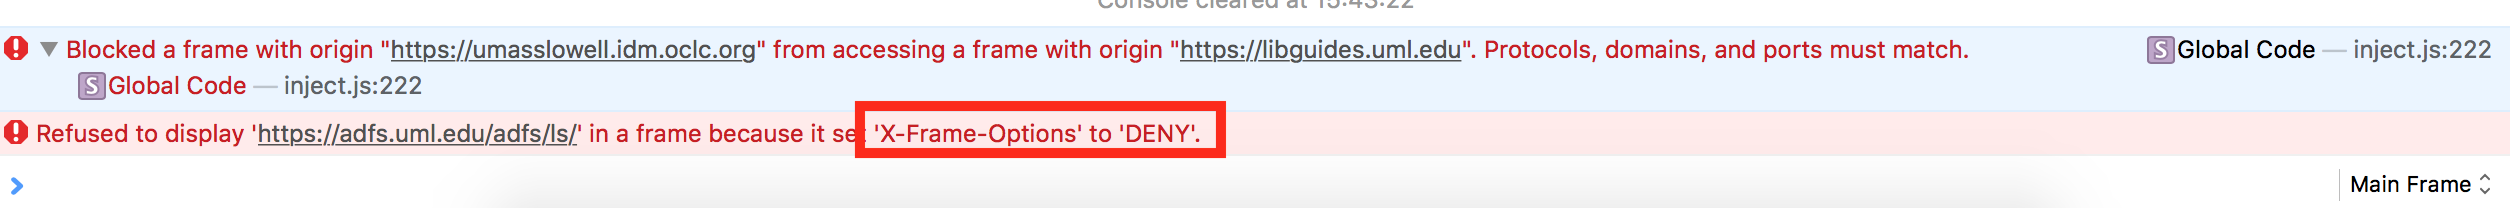 Refused to display the URL because it set XFrame Options To Deny